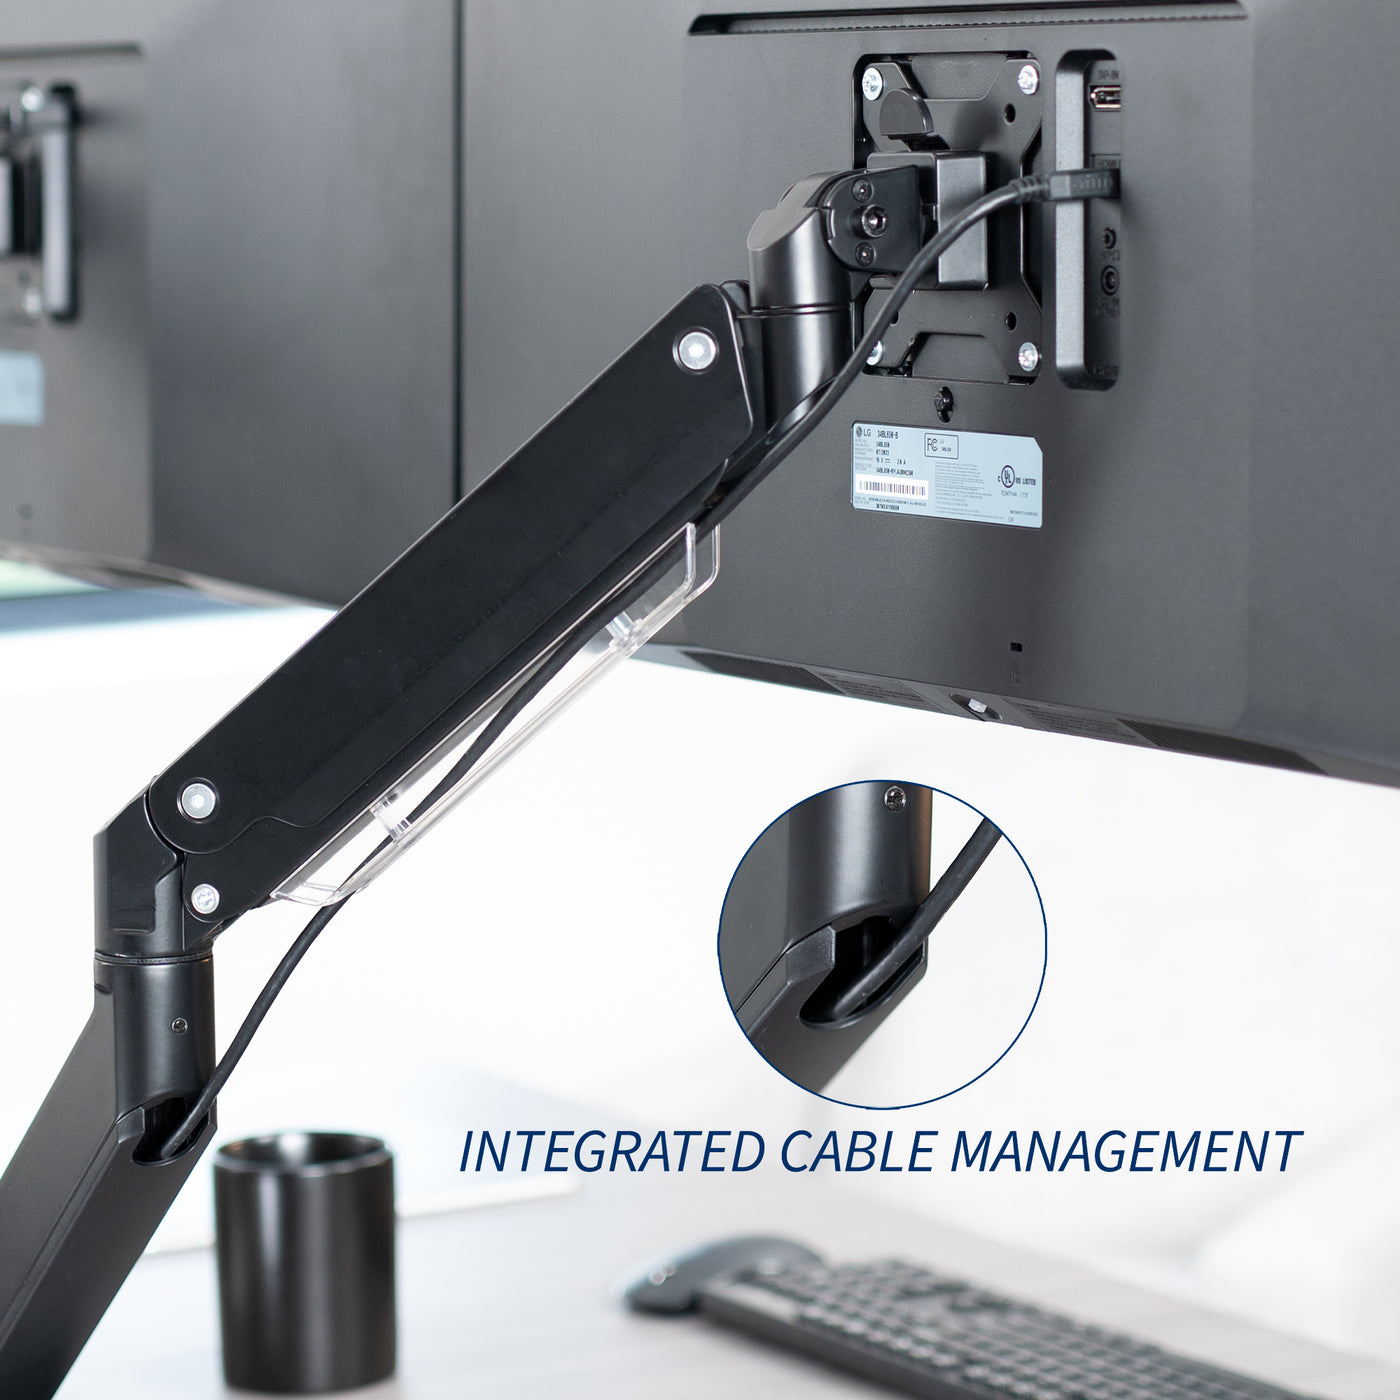 Adjustable pneumatic dual monitor desk mount with USB ports for ultrawide monitors with integrated cable management.